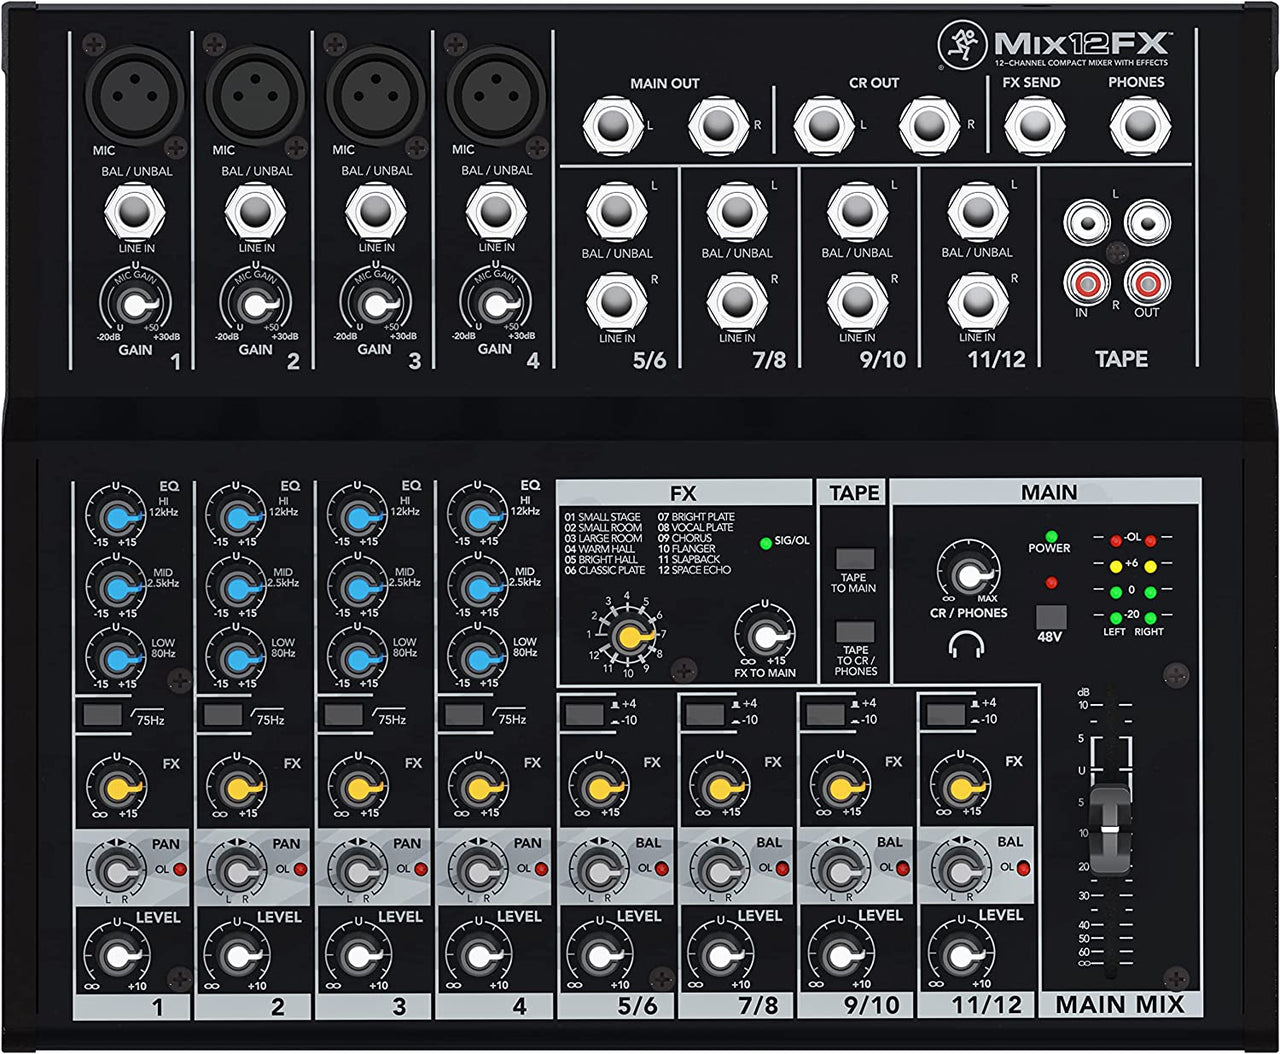 Mackie Mix12FX Mix Series, 12-Channel Compact Effects Mixer with Studio-Level Audio Quality and FX